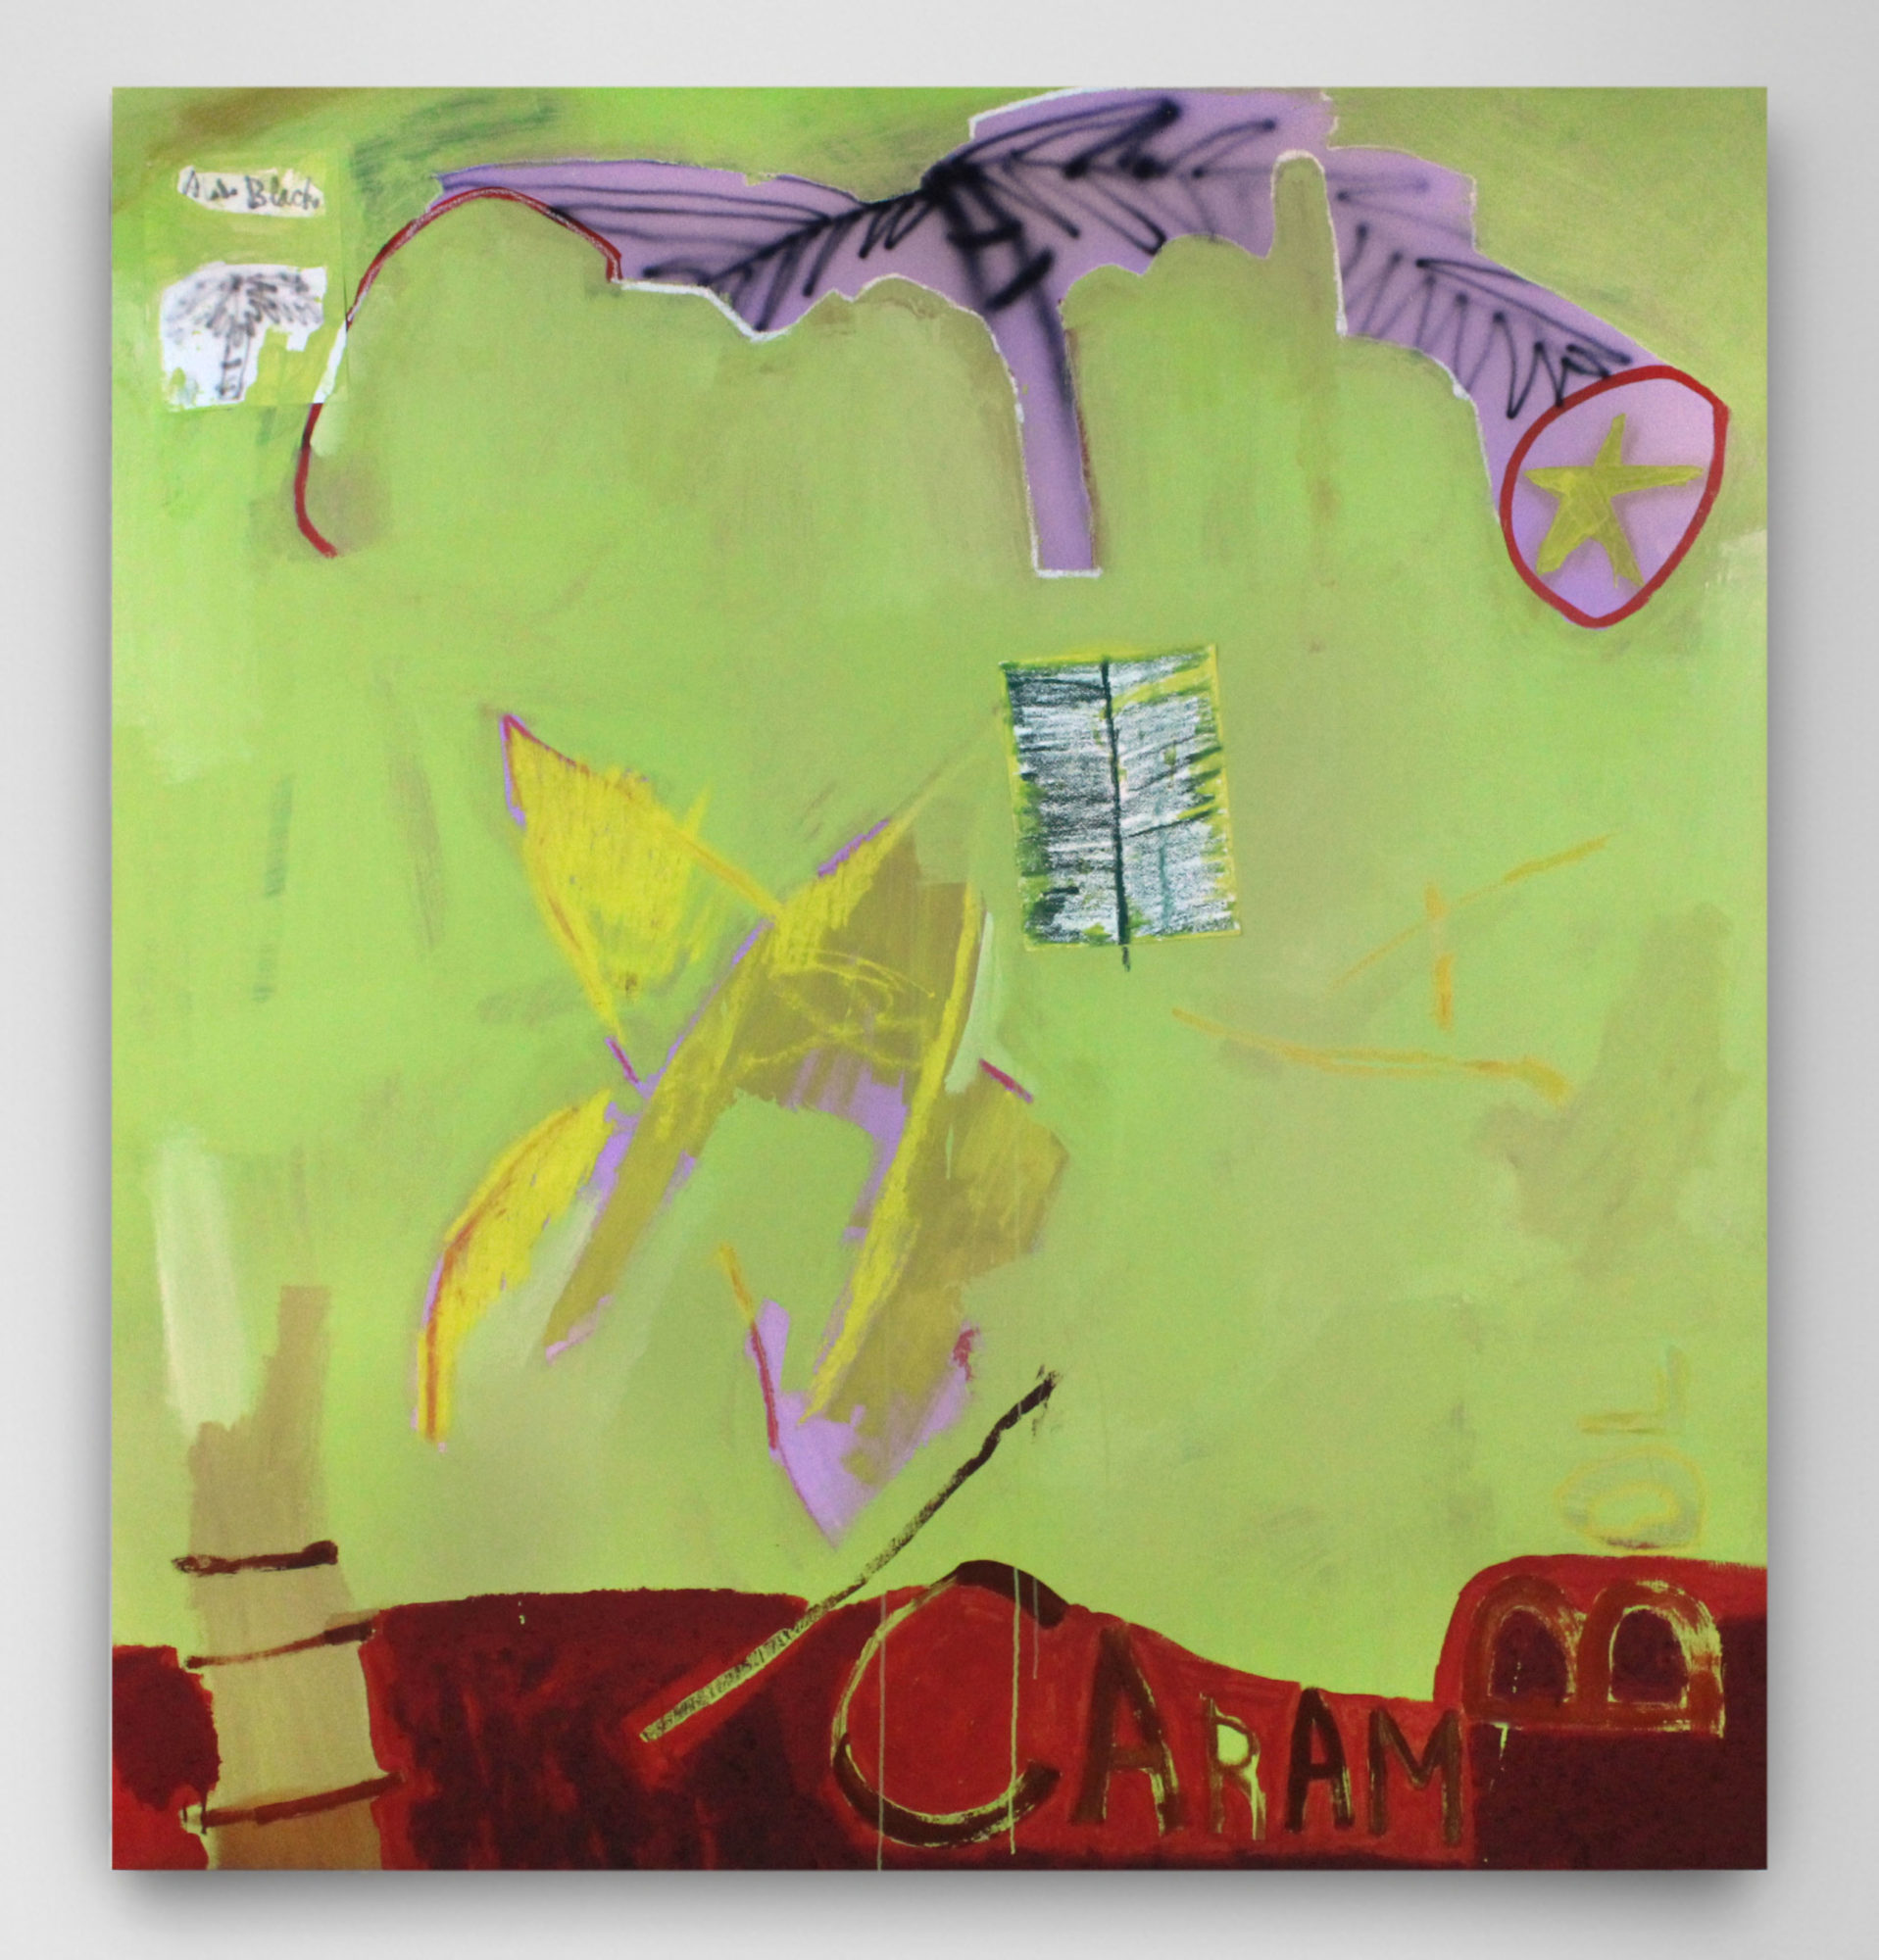 an image of the work 'Carambola' by Sahlehe - the image features a lime green color, yellow stars and palm trees